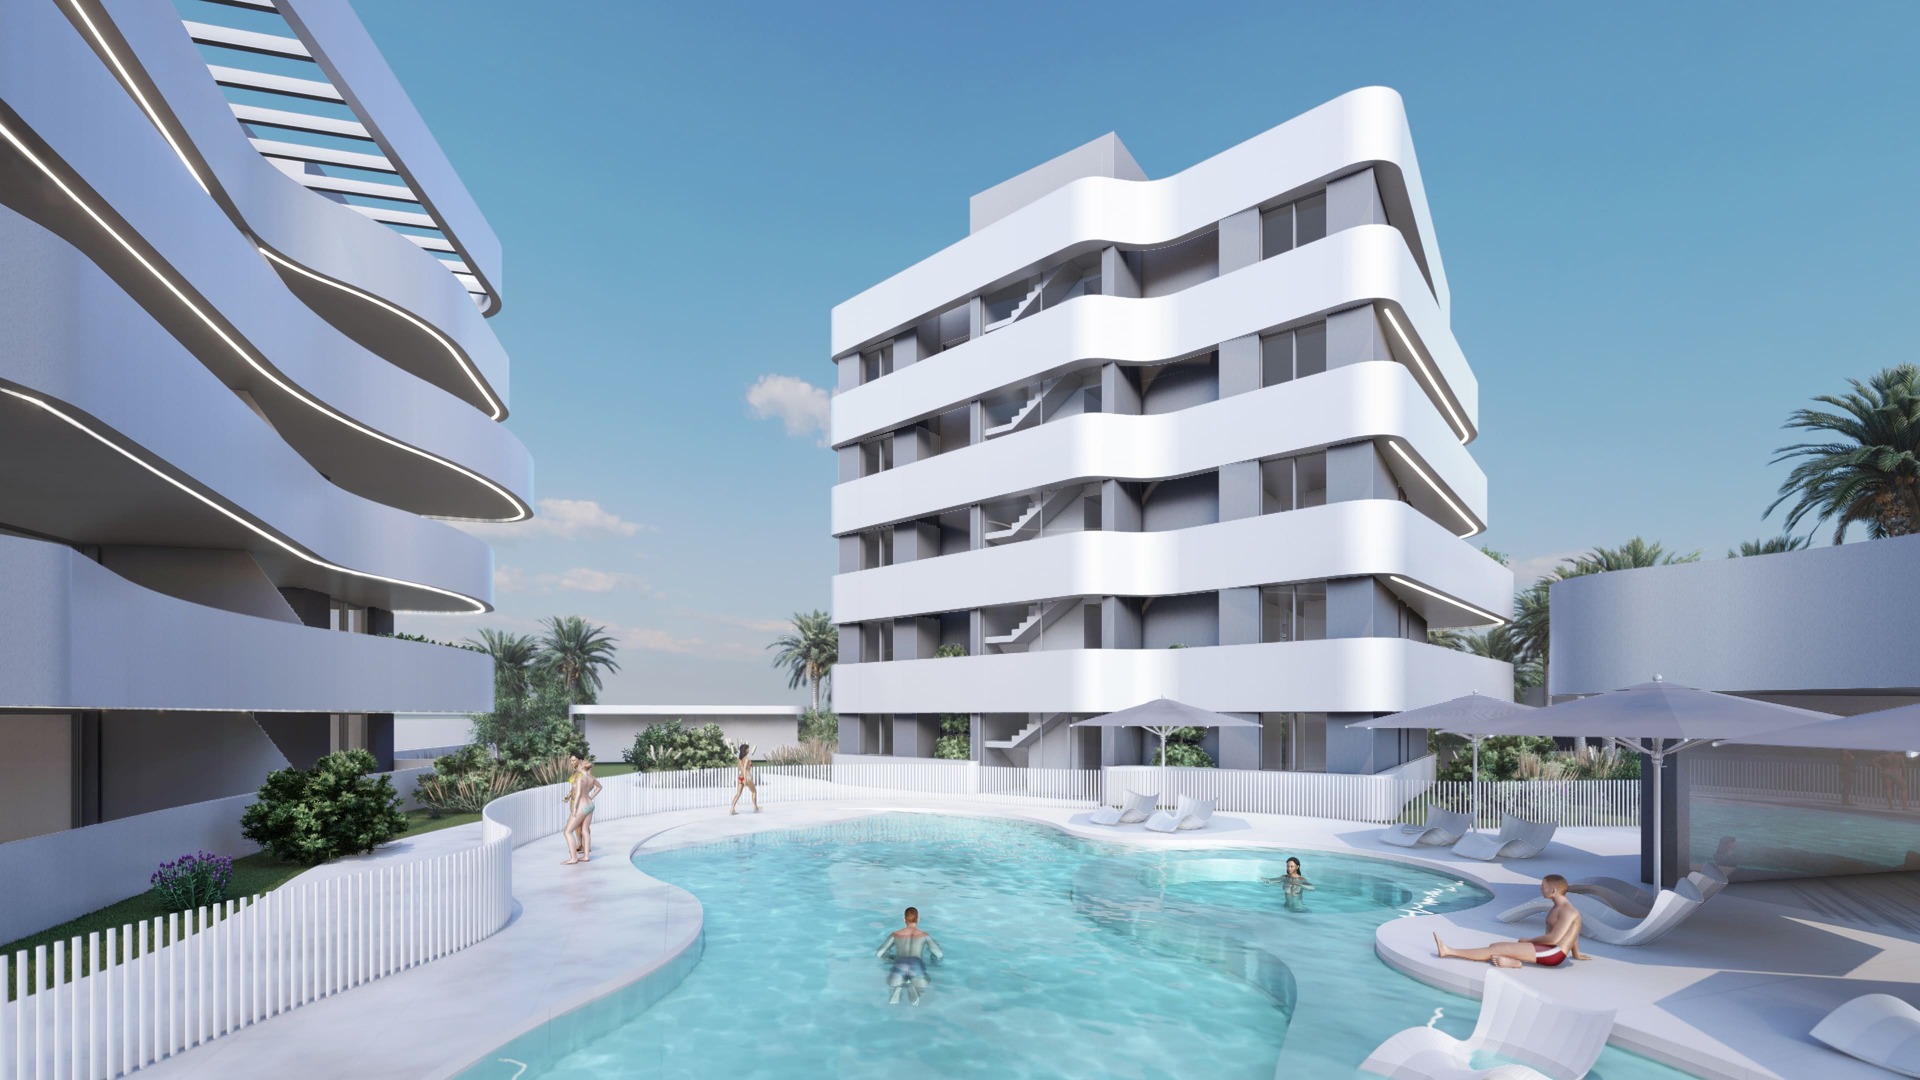 Luxury new-build apartments for sale near a nature reserve and the salt lakes in El Raso, Guardamar.